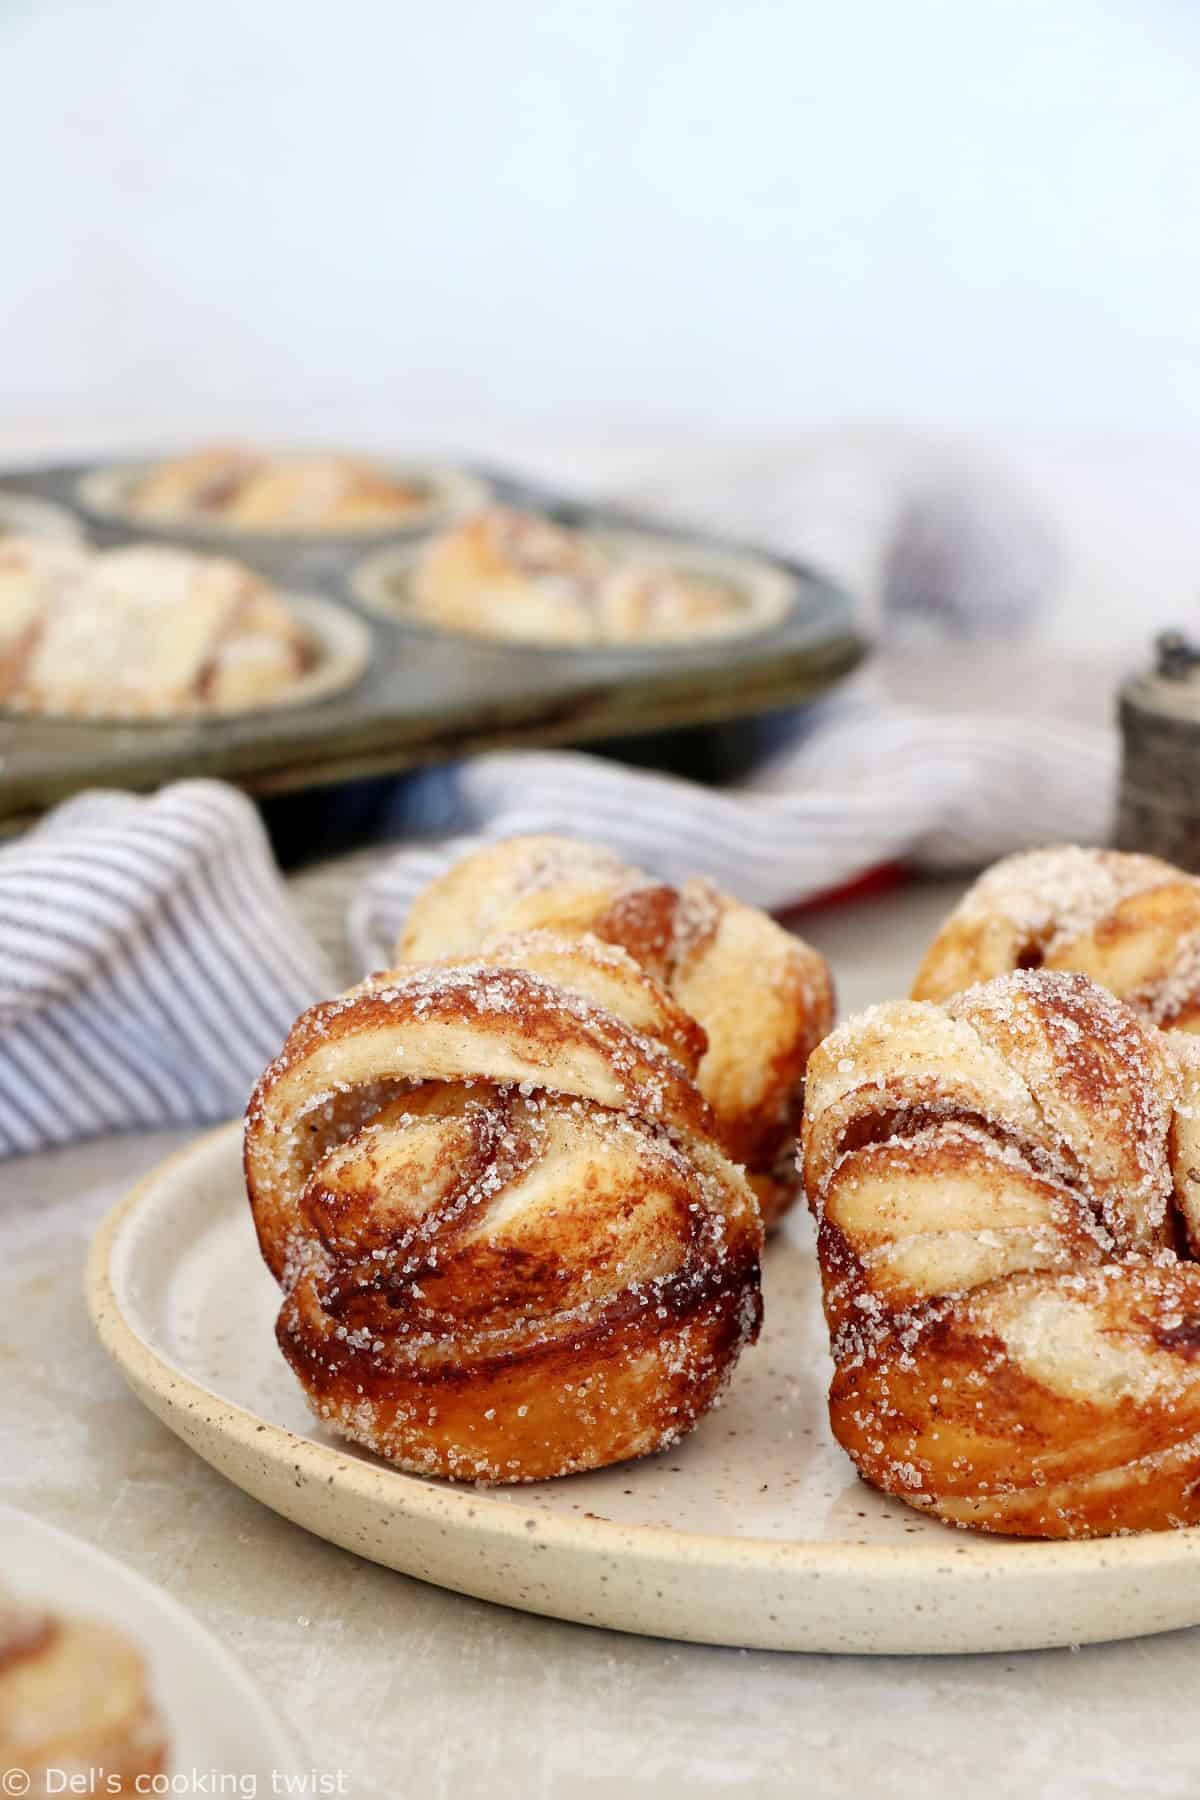 This easy cinnamon cardamom muffins recipe is a cross between a croissant and a muffin. In this easy version, the croissant dough is replaced with puff pastry, filled with cinnamon and coated in a cardamon-sugar mixture.